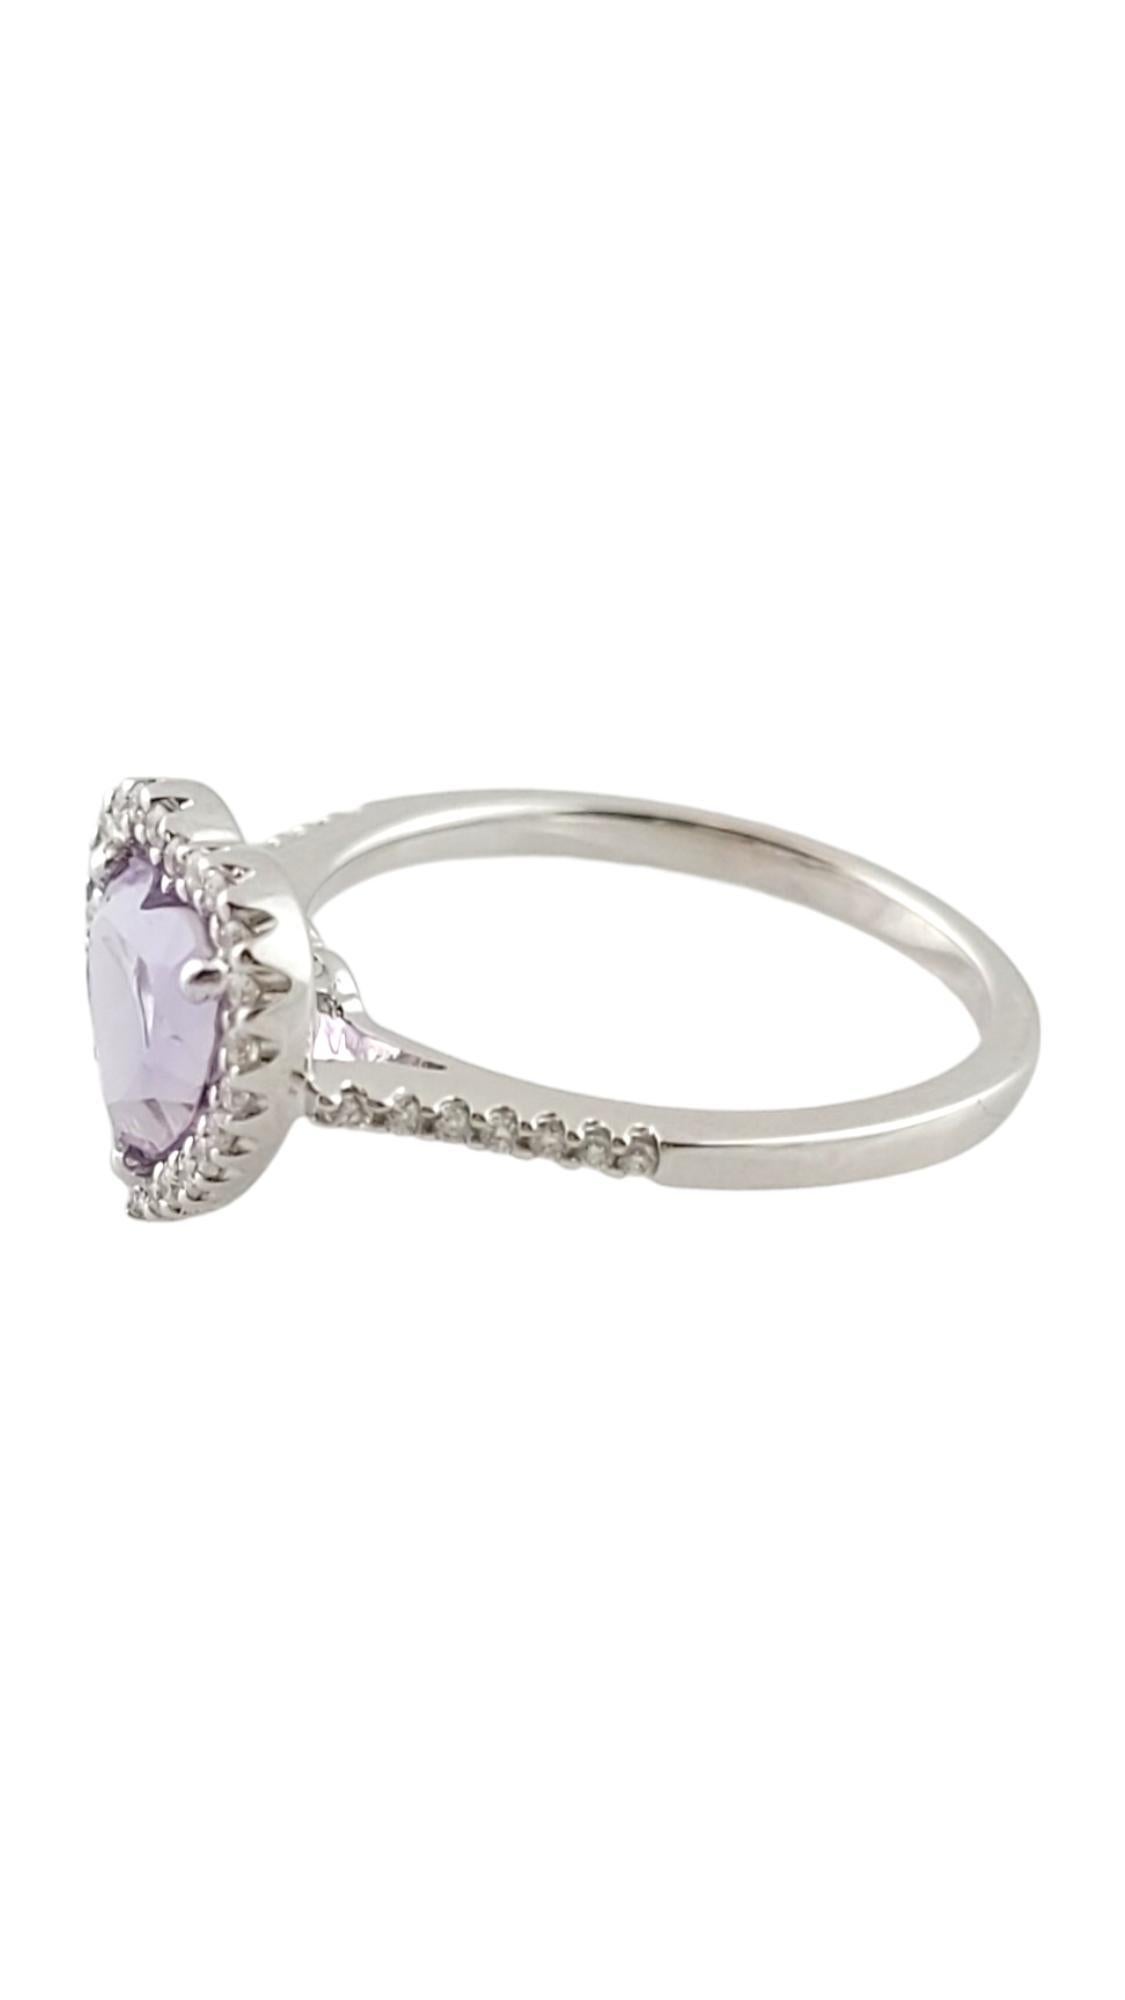 Vintage 18K White Gold Diamond & Amethyst Heart Halo Ring Size 6.5

This gorgeous ring features a beautiful heart shaped amethyst stone with a beautiful diamond halo with 36 sparkling round cut diamonds! 

Amethyst size: 7.14mm X 7.01mm X